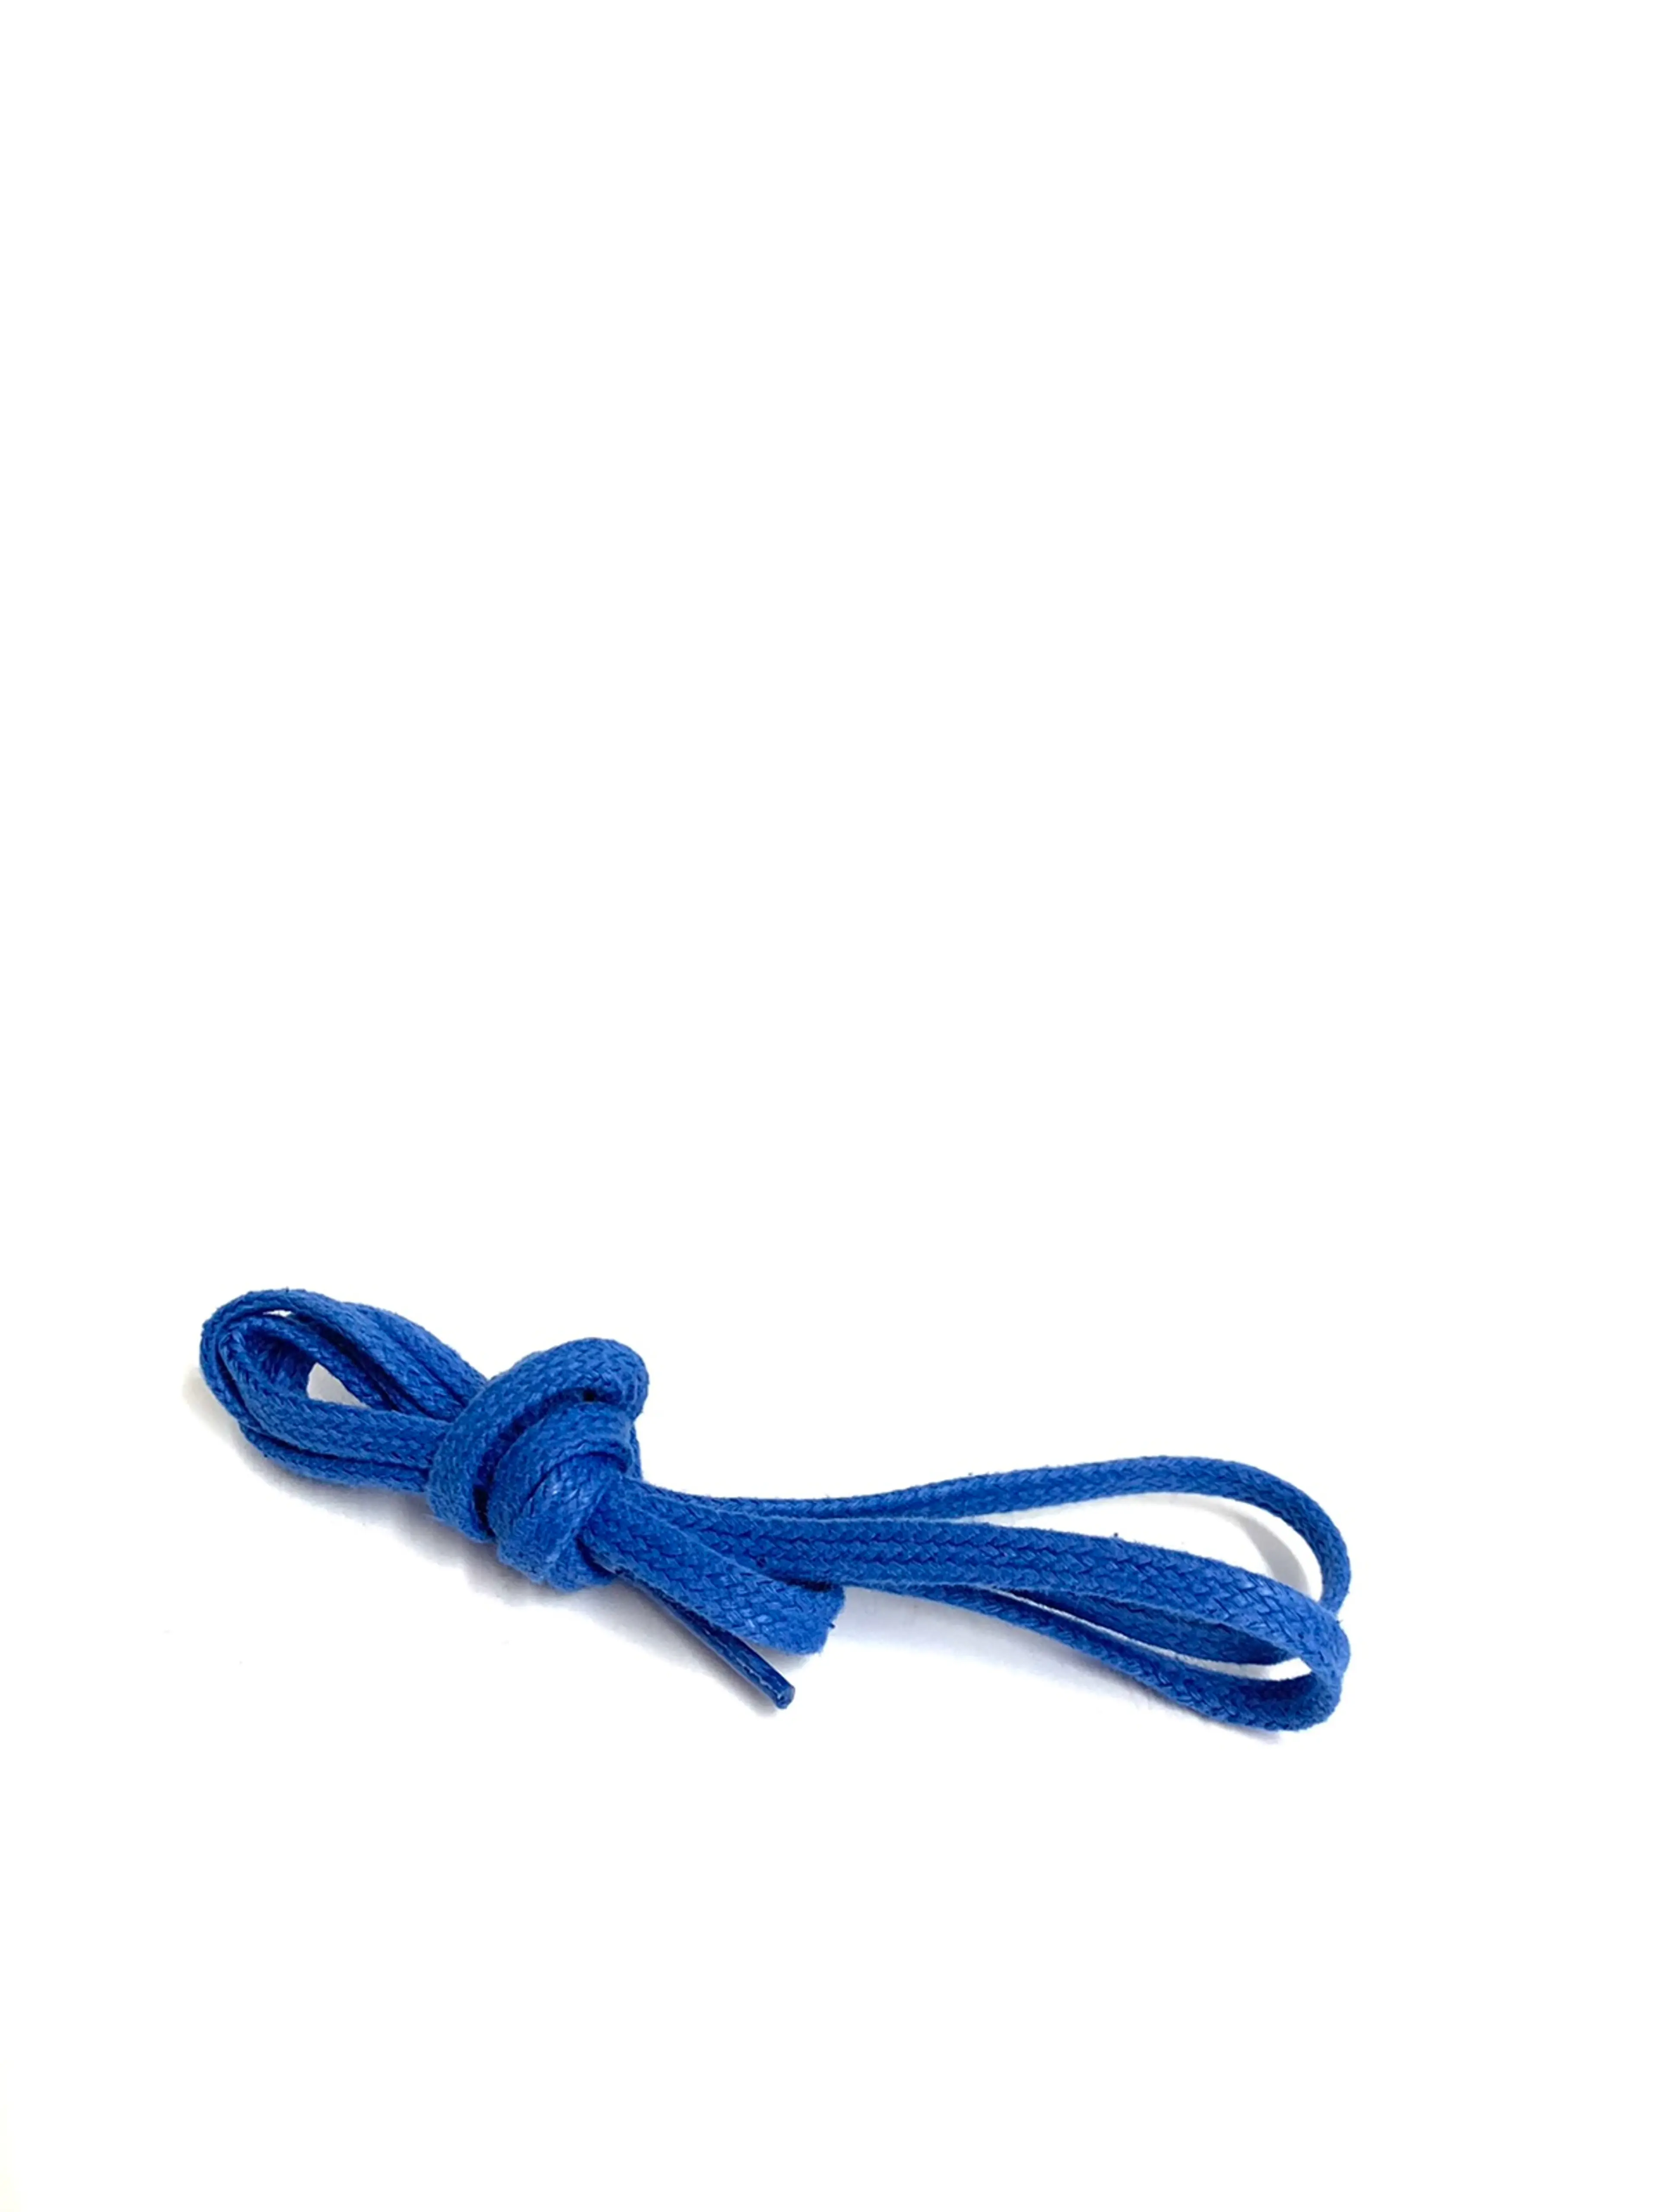 Shoelaces rubber band